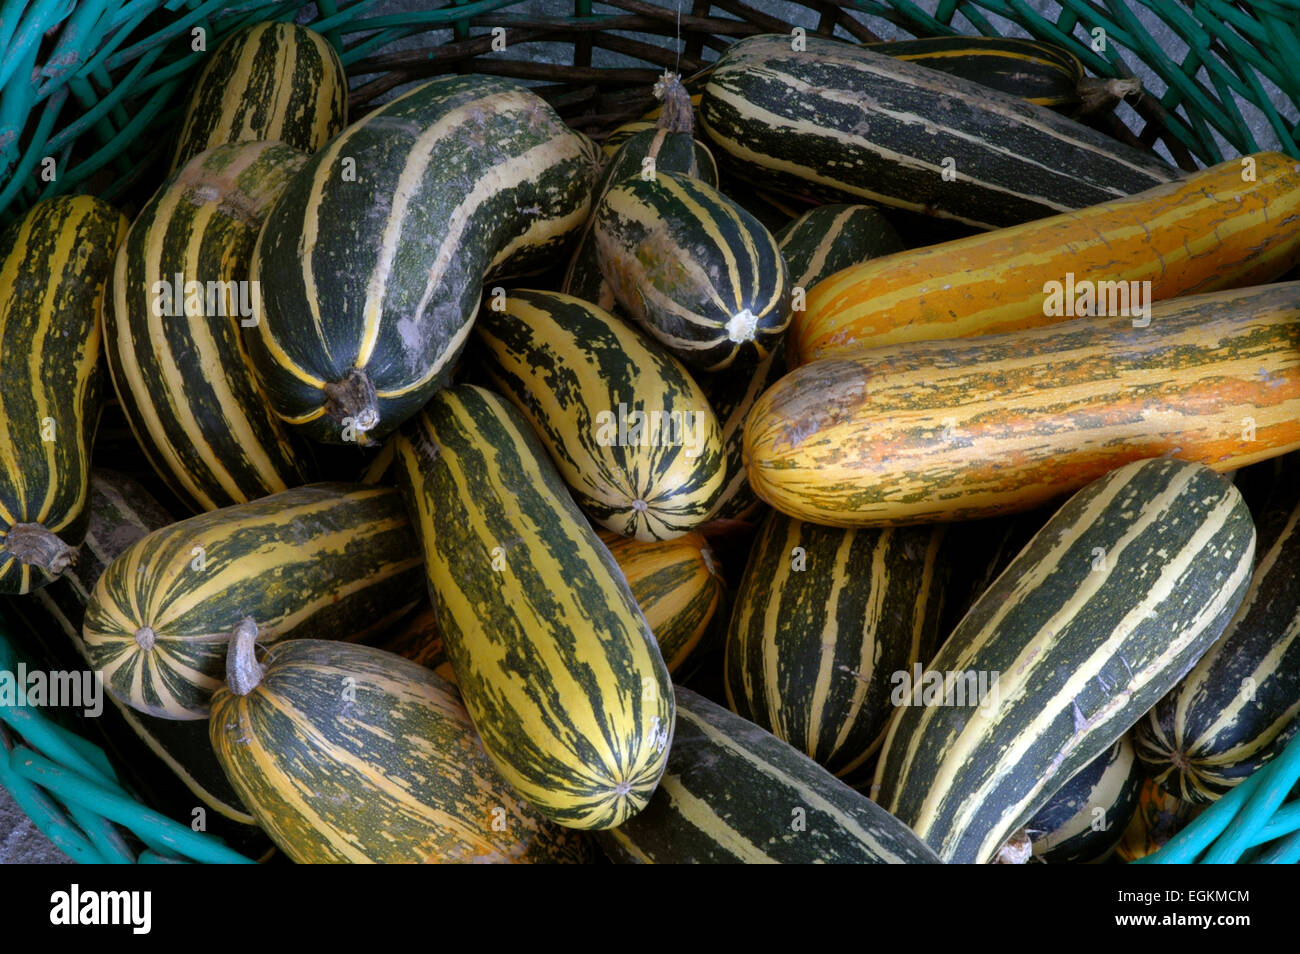 pumpkins and squashes Stock Photo